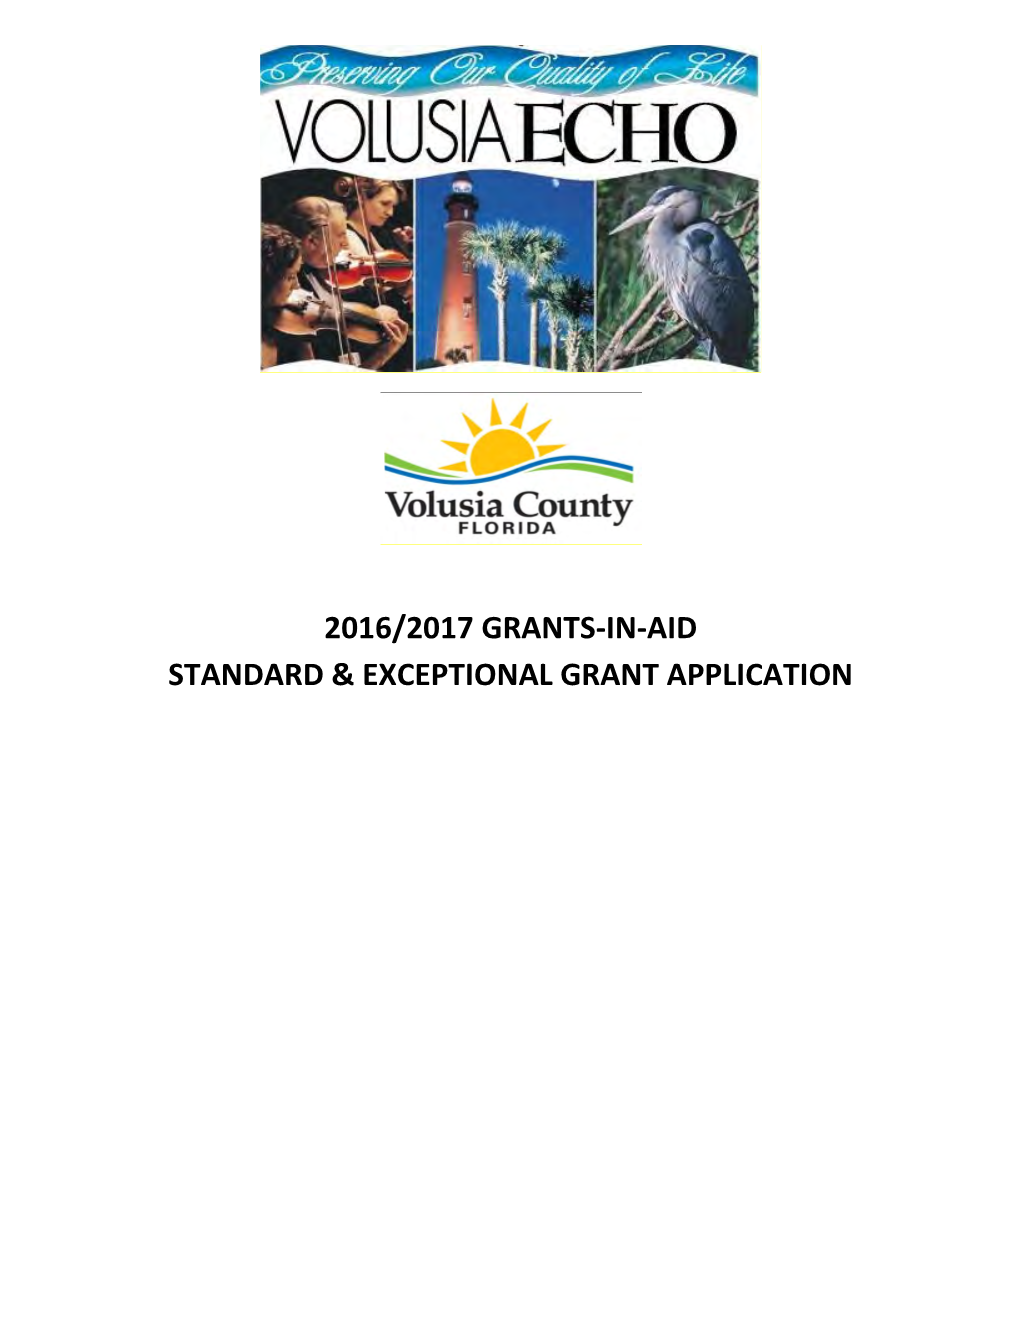 2016/2017 Grants-In-Aid Standard & Exceptional Grant Application